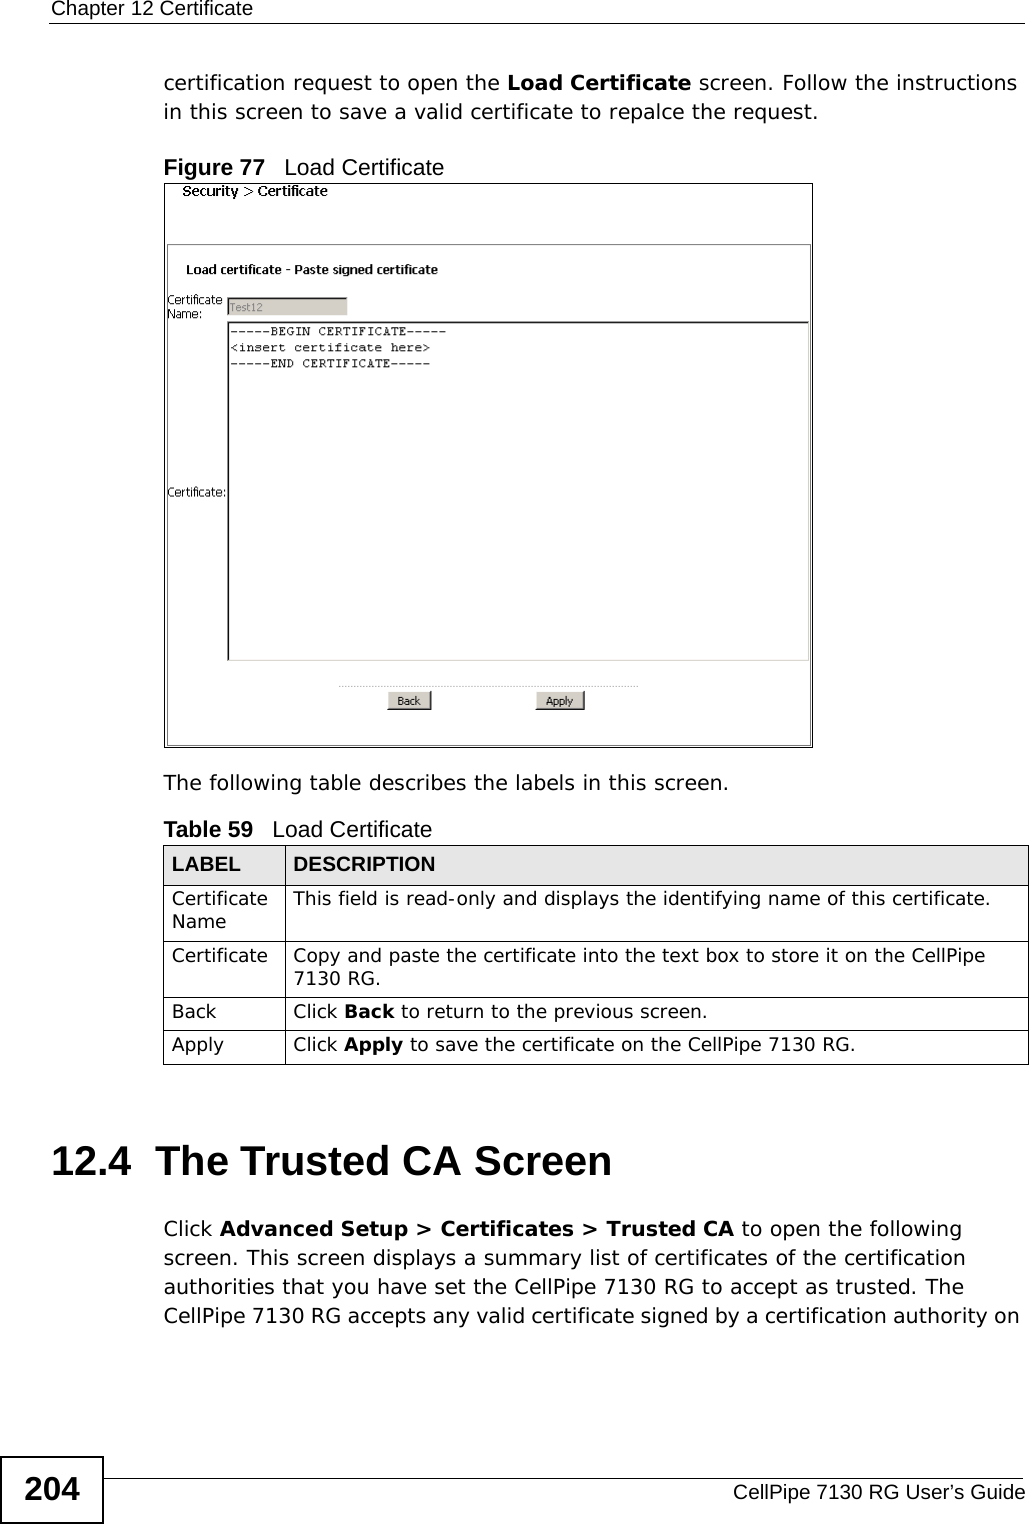 Chapter 12 CertificateCellPipe 7130 RG User’s Guide204certification request to open the Load Certificate screen. Follow the instructions in this screen to save a valid certificate to repalce the request.Figure 77   Load Certificate The following table describes the labels in this screen. 12.4  The Trusted CA ScreenClick Advanced Setup &gt; Certificates &gt; Trusted CA to open the following screen. This screen displays a summary list of certificates of the certification authorities that you have set the CellPipe 7130 RG to accept as trusted. The CellPipe 7130 RG accepts any valid certificate signed by a certification authority on Table 59   Load CertificateLABEL DESCRIPTIONCertificate Name This field is read-only and displays the identifying name of this certificate.Certificate Copy and paste the certificate into the text box to store it on the CellPipe 7130 RG.Back Click Back to return to the previous screen.Apply Click Apply to save the certificate on the CellPipe 7130 RG.